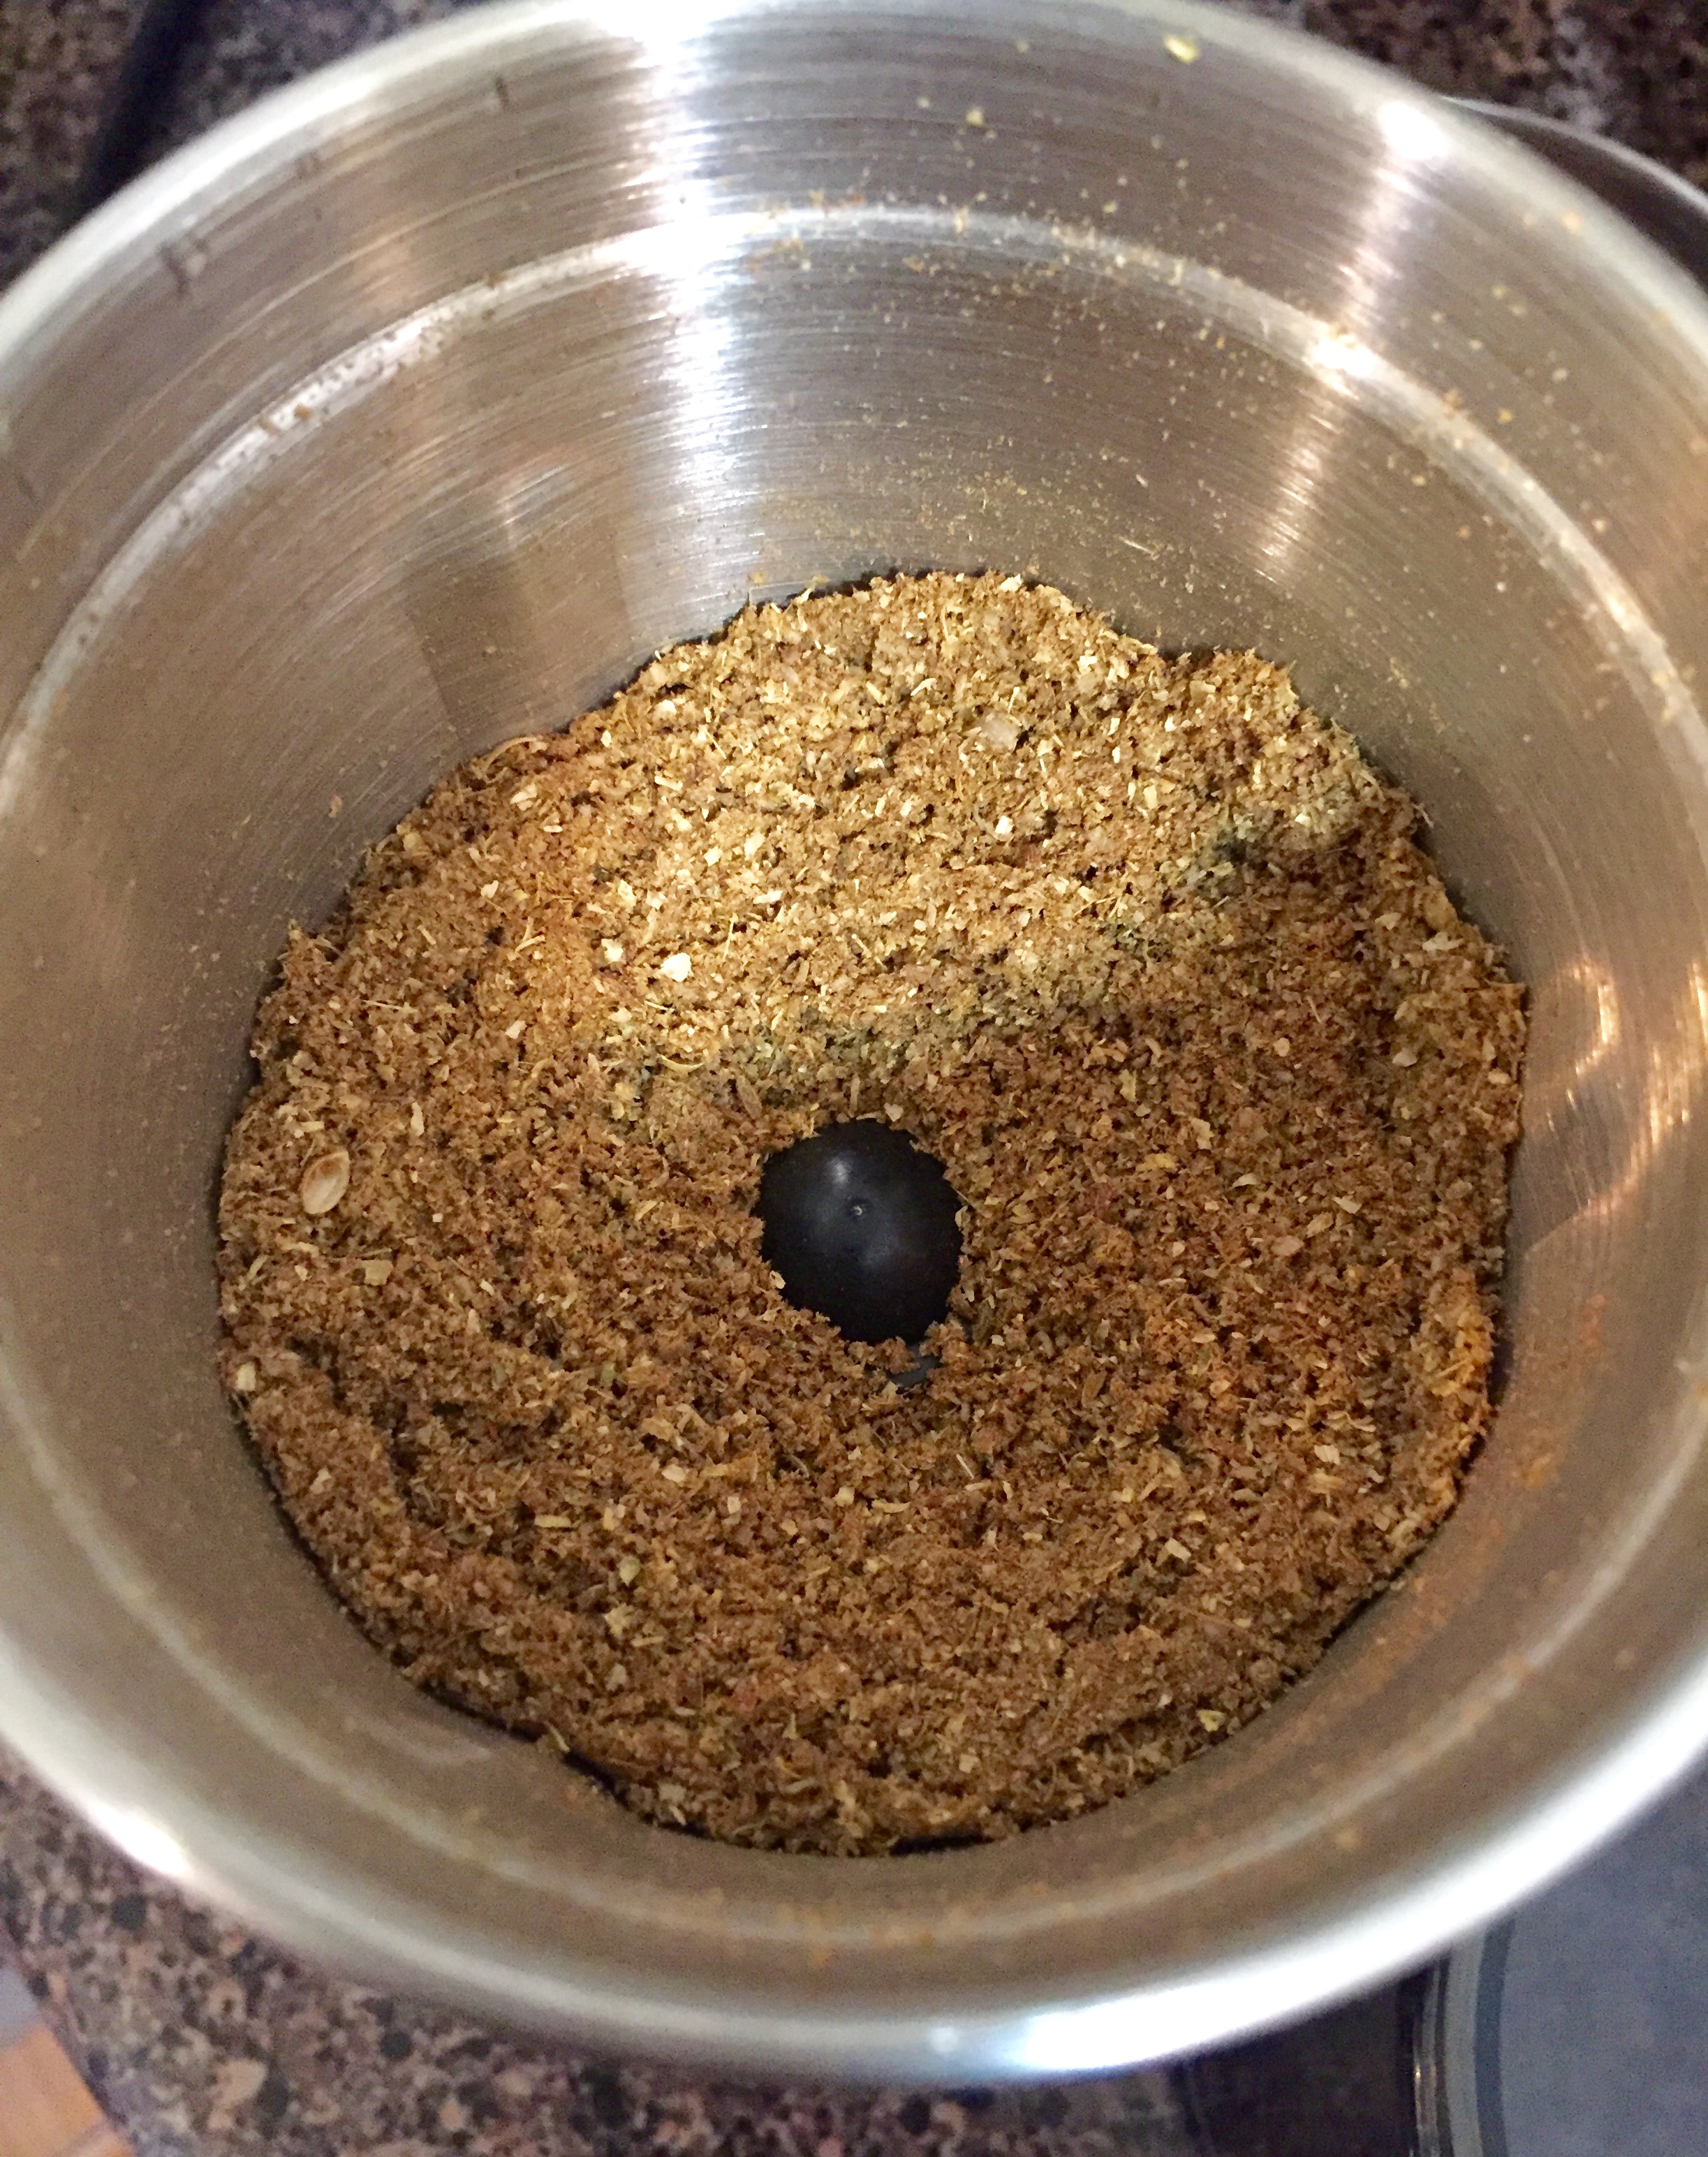 Grinding roasted coriander and cumin seeds